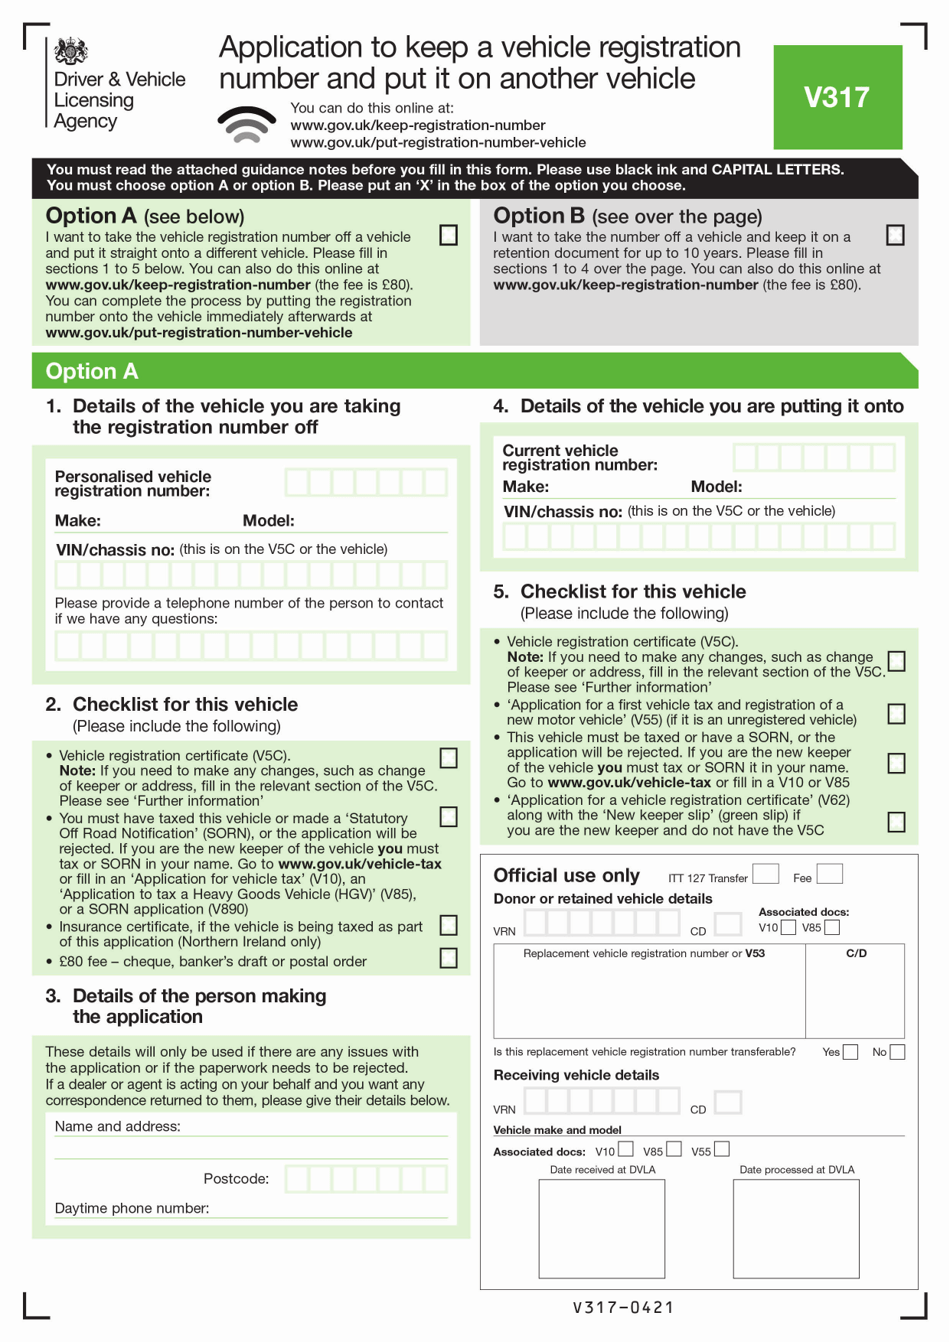 Form V317 Application to Keep a Vehicle Registration Number and Put It on Another Vehicle - United Kingdom, Page 1